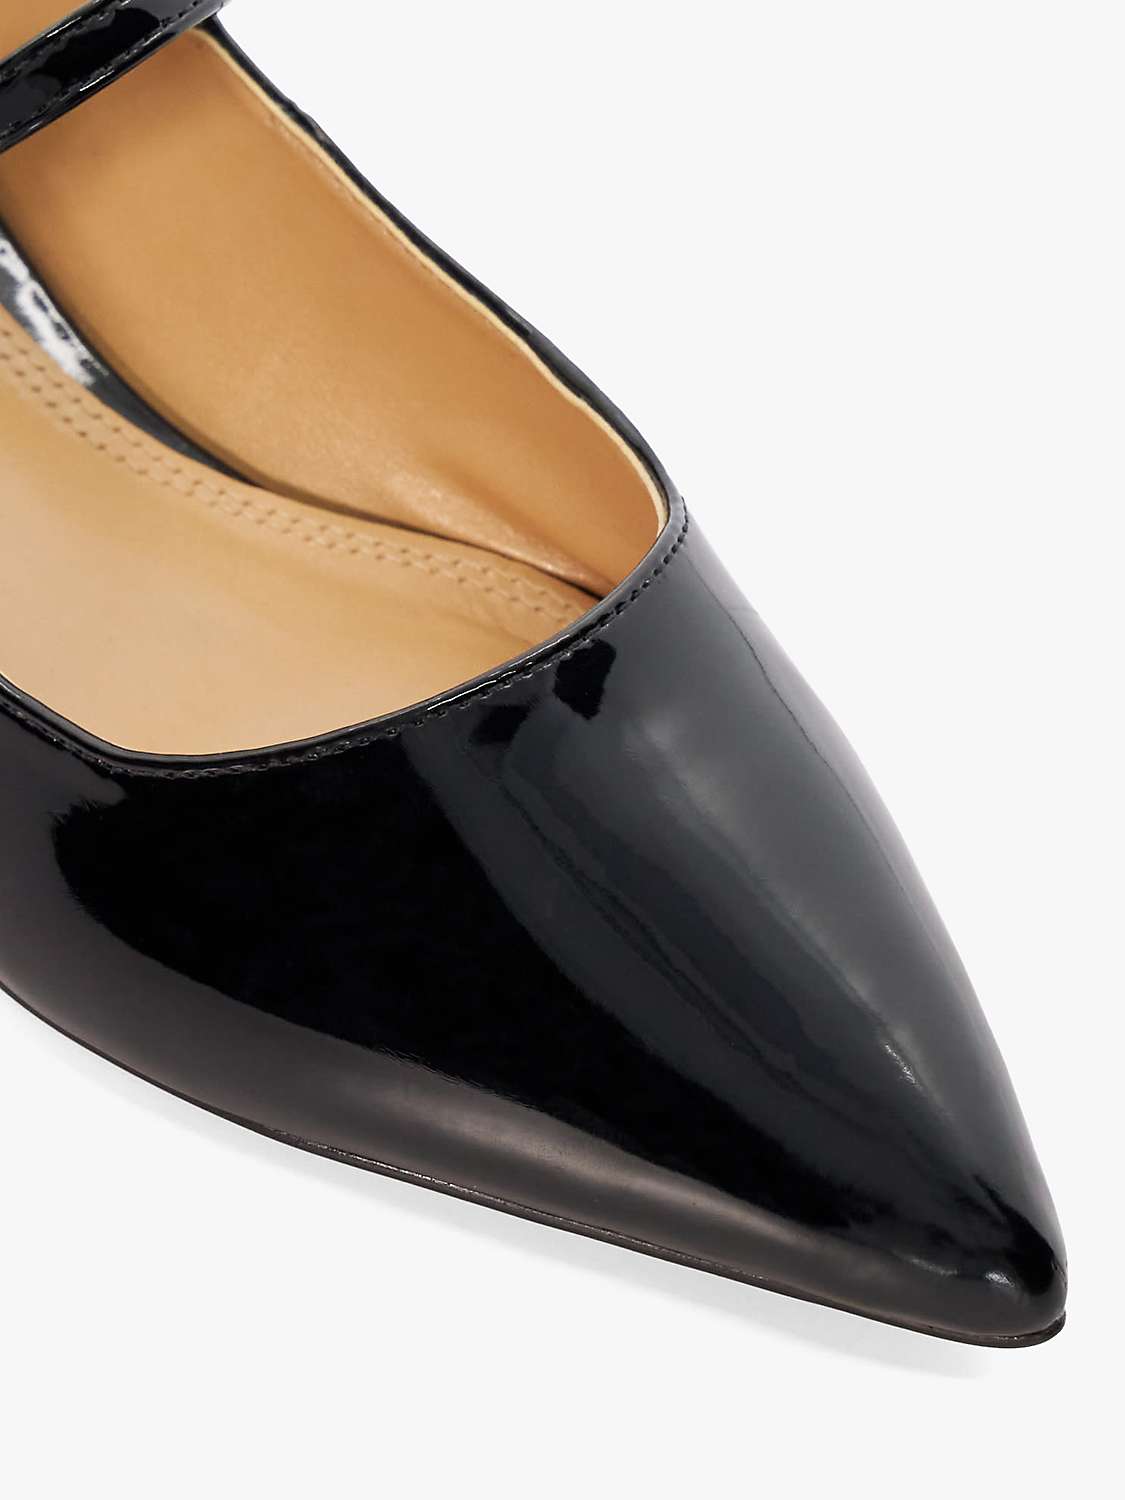 Buy Dune Hastas Pointed Mary Jane Shoes, Black Online at johnlewis.com